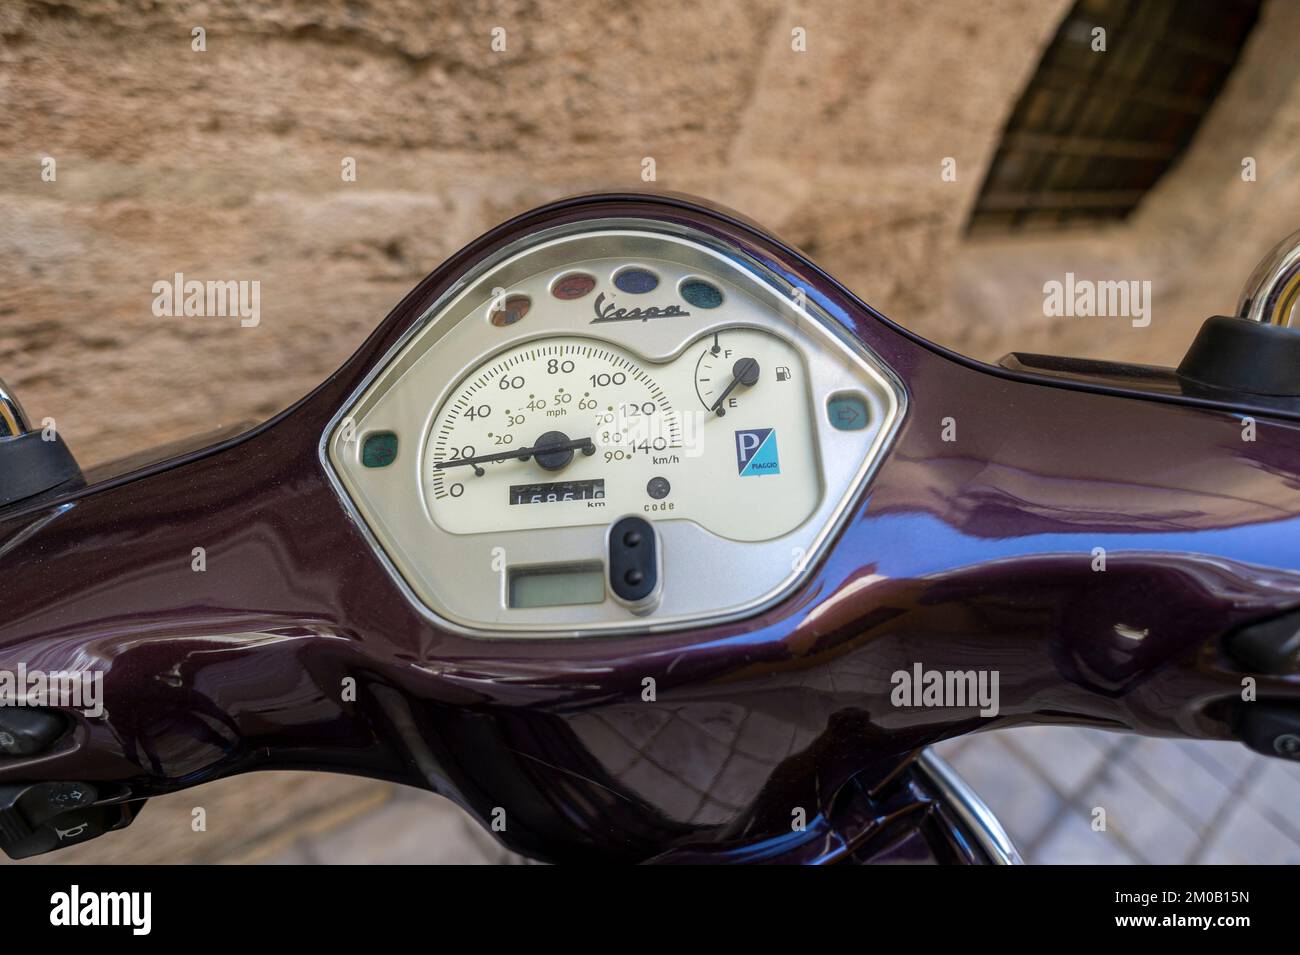 Close up detail of a modern retro vespa scooter dashboard Stock Photo